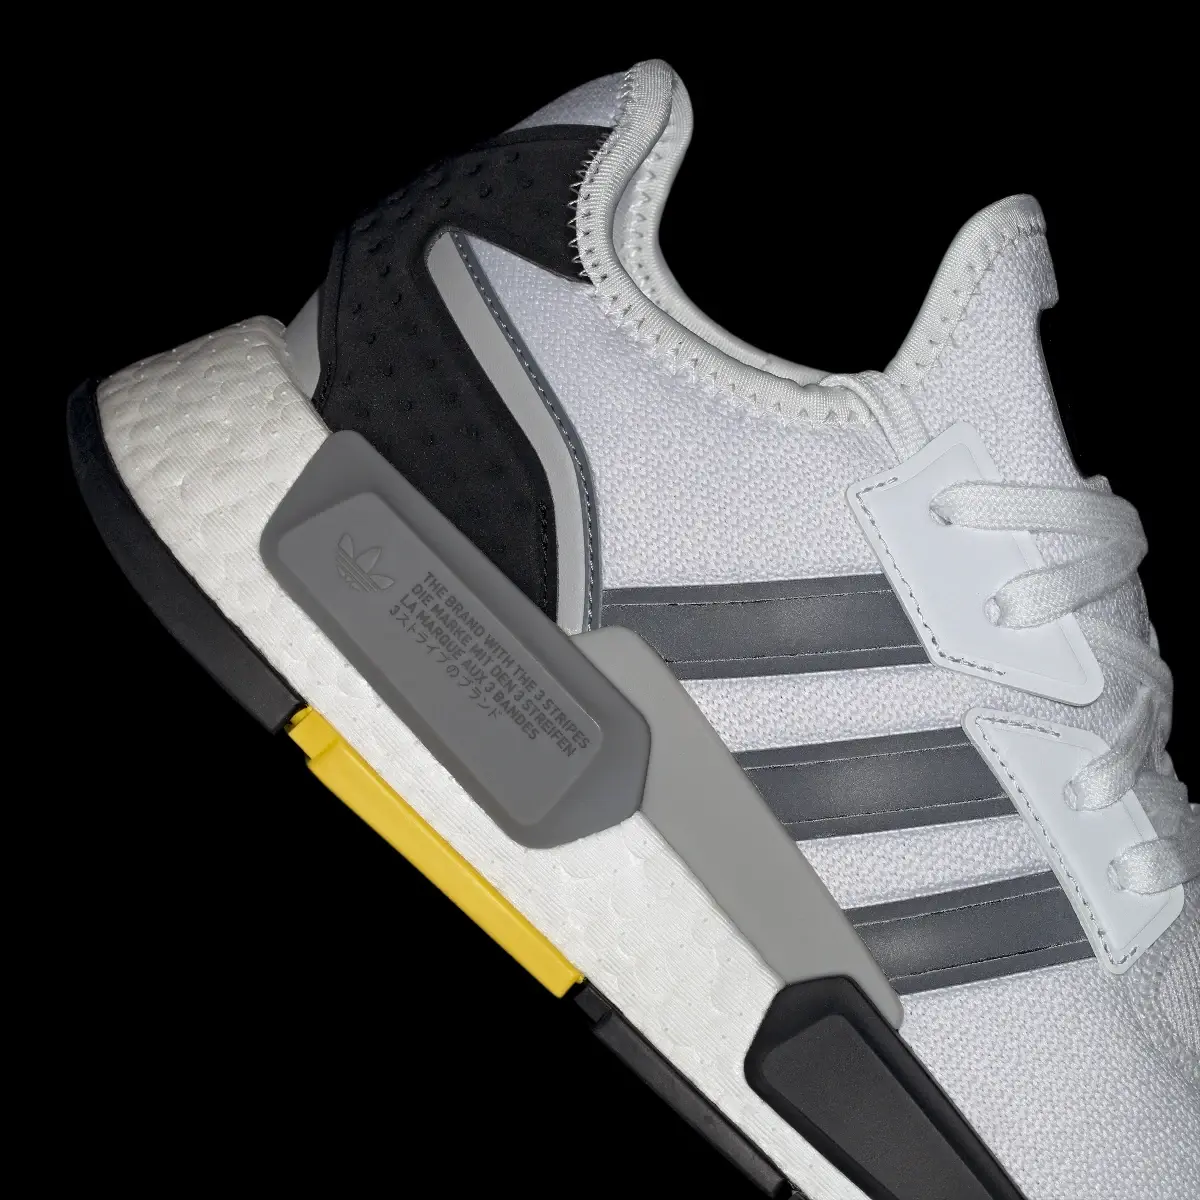 Adidas NMD_G1 Shoes. 3